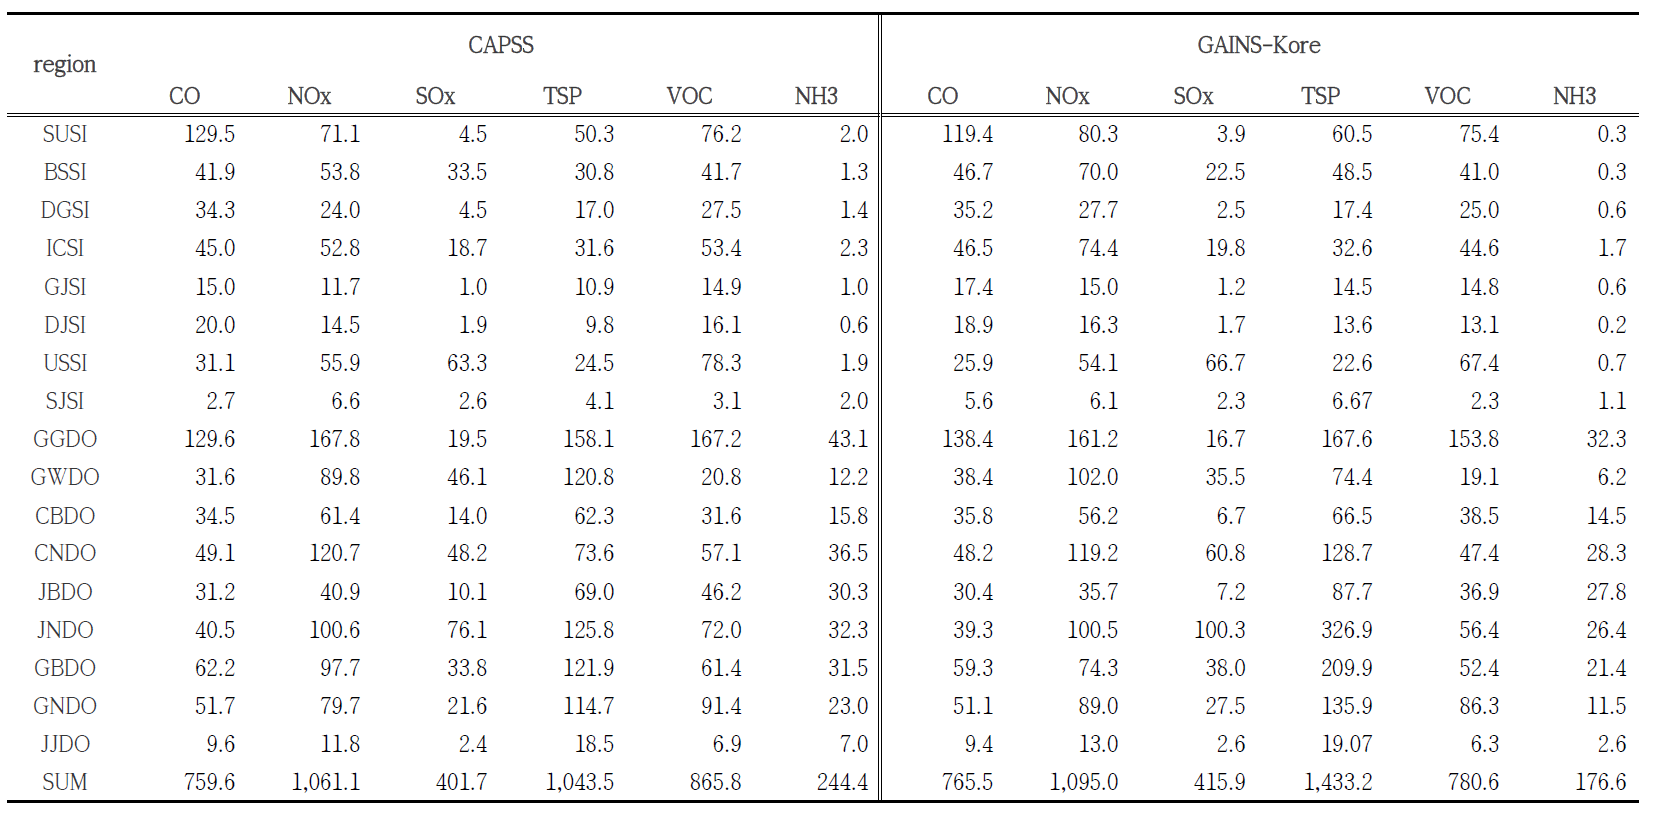 Comparison of regional emissions in 2010 from CAPSS and GAINS-Korea